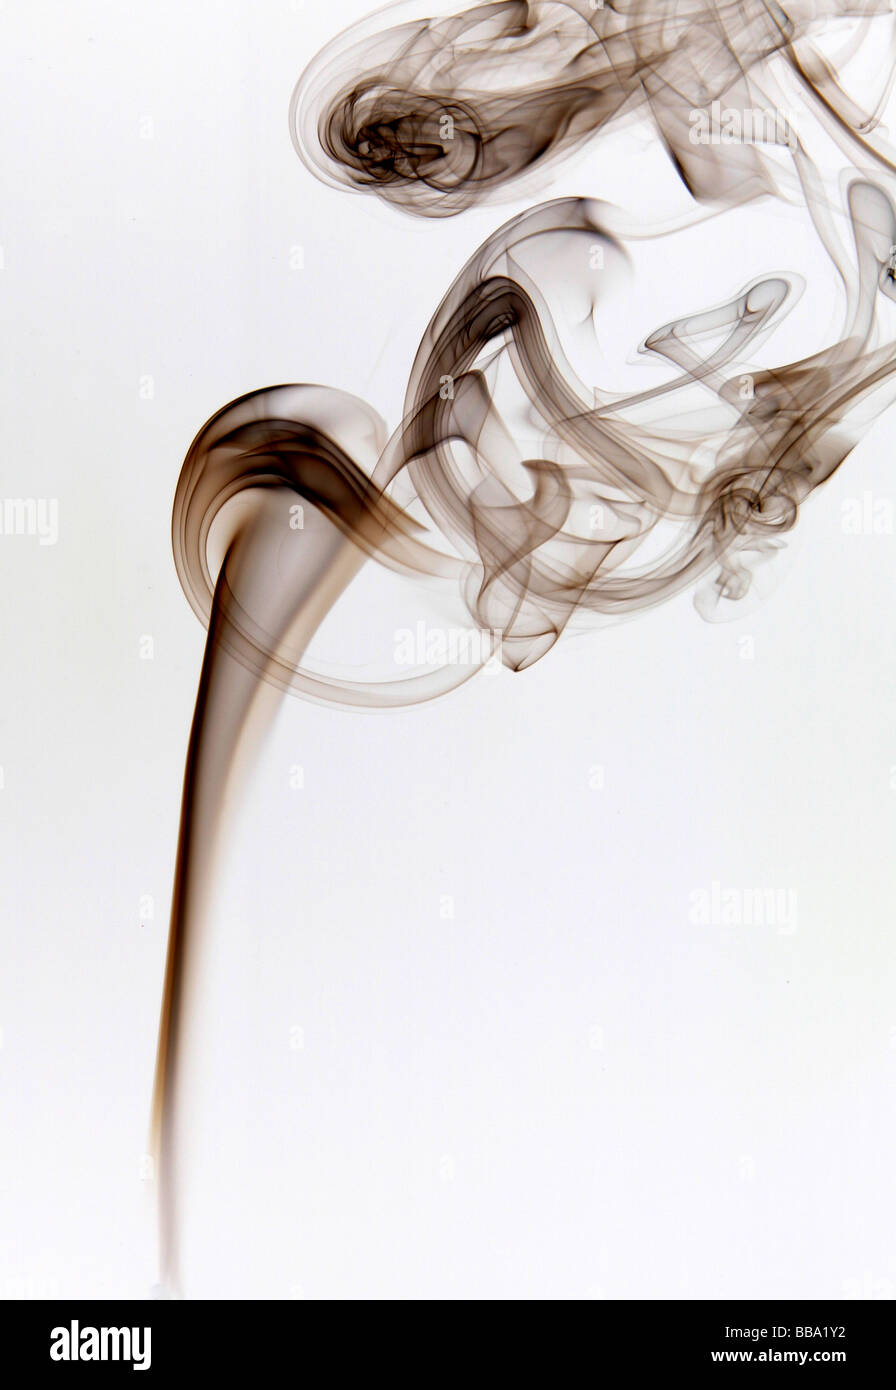 Smoke patterns. Smoke forming vortices (swirling patterns) in the air Stock Photo